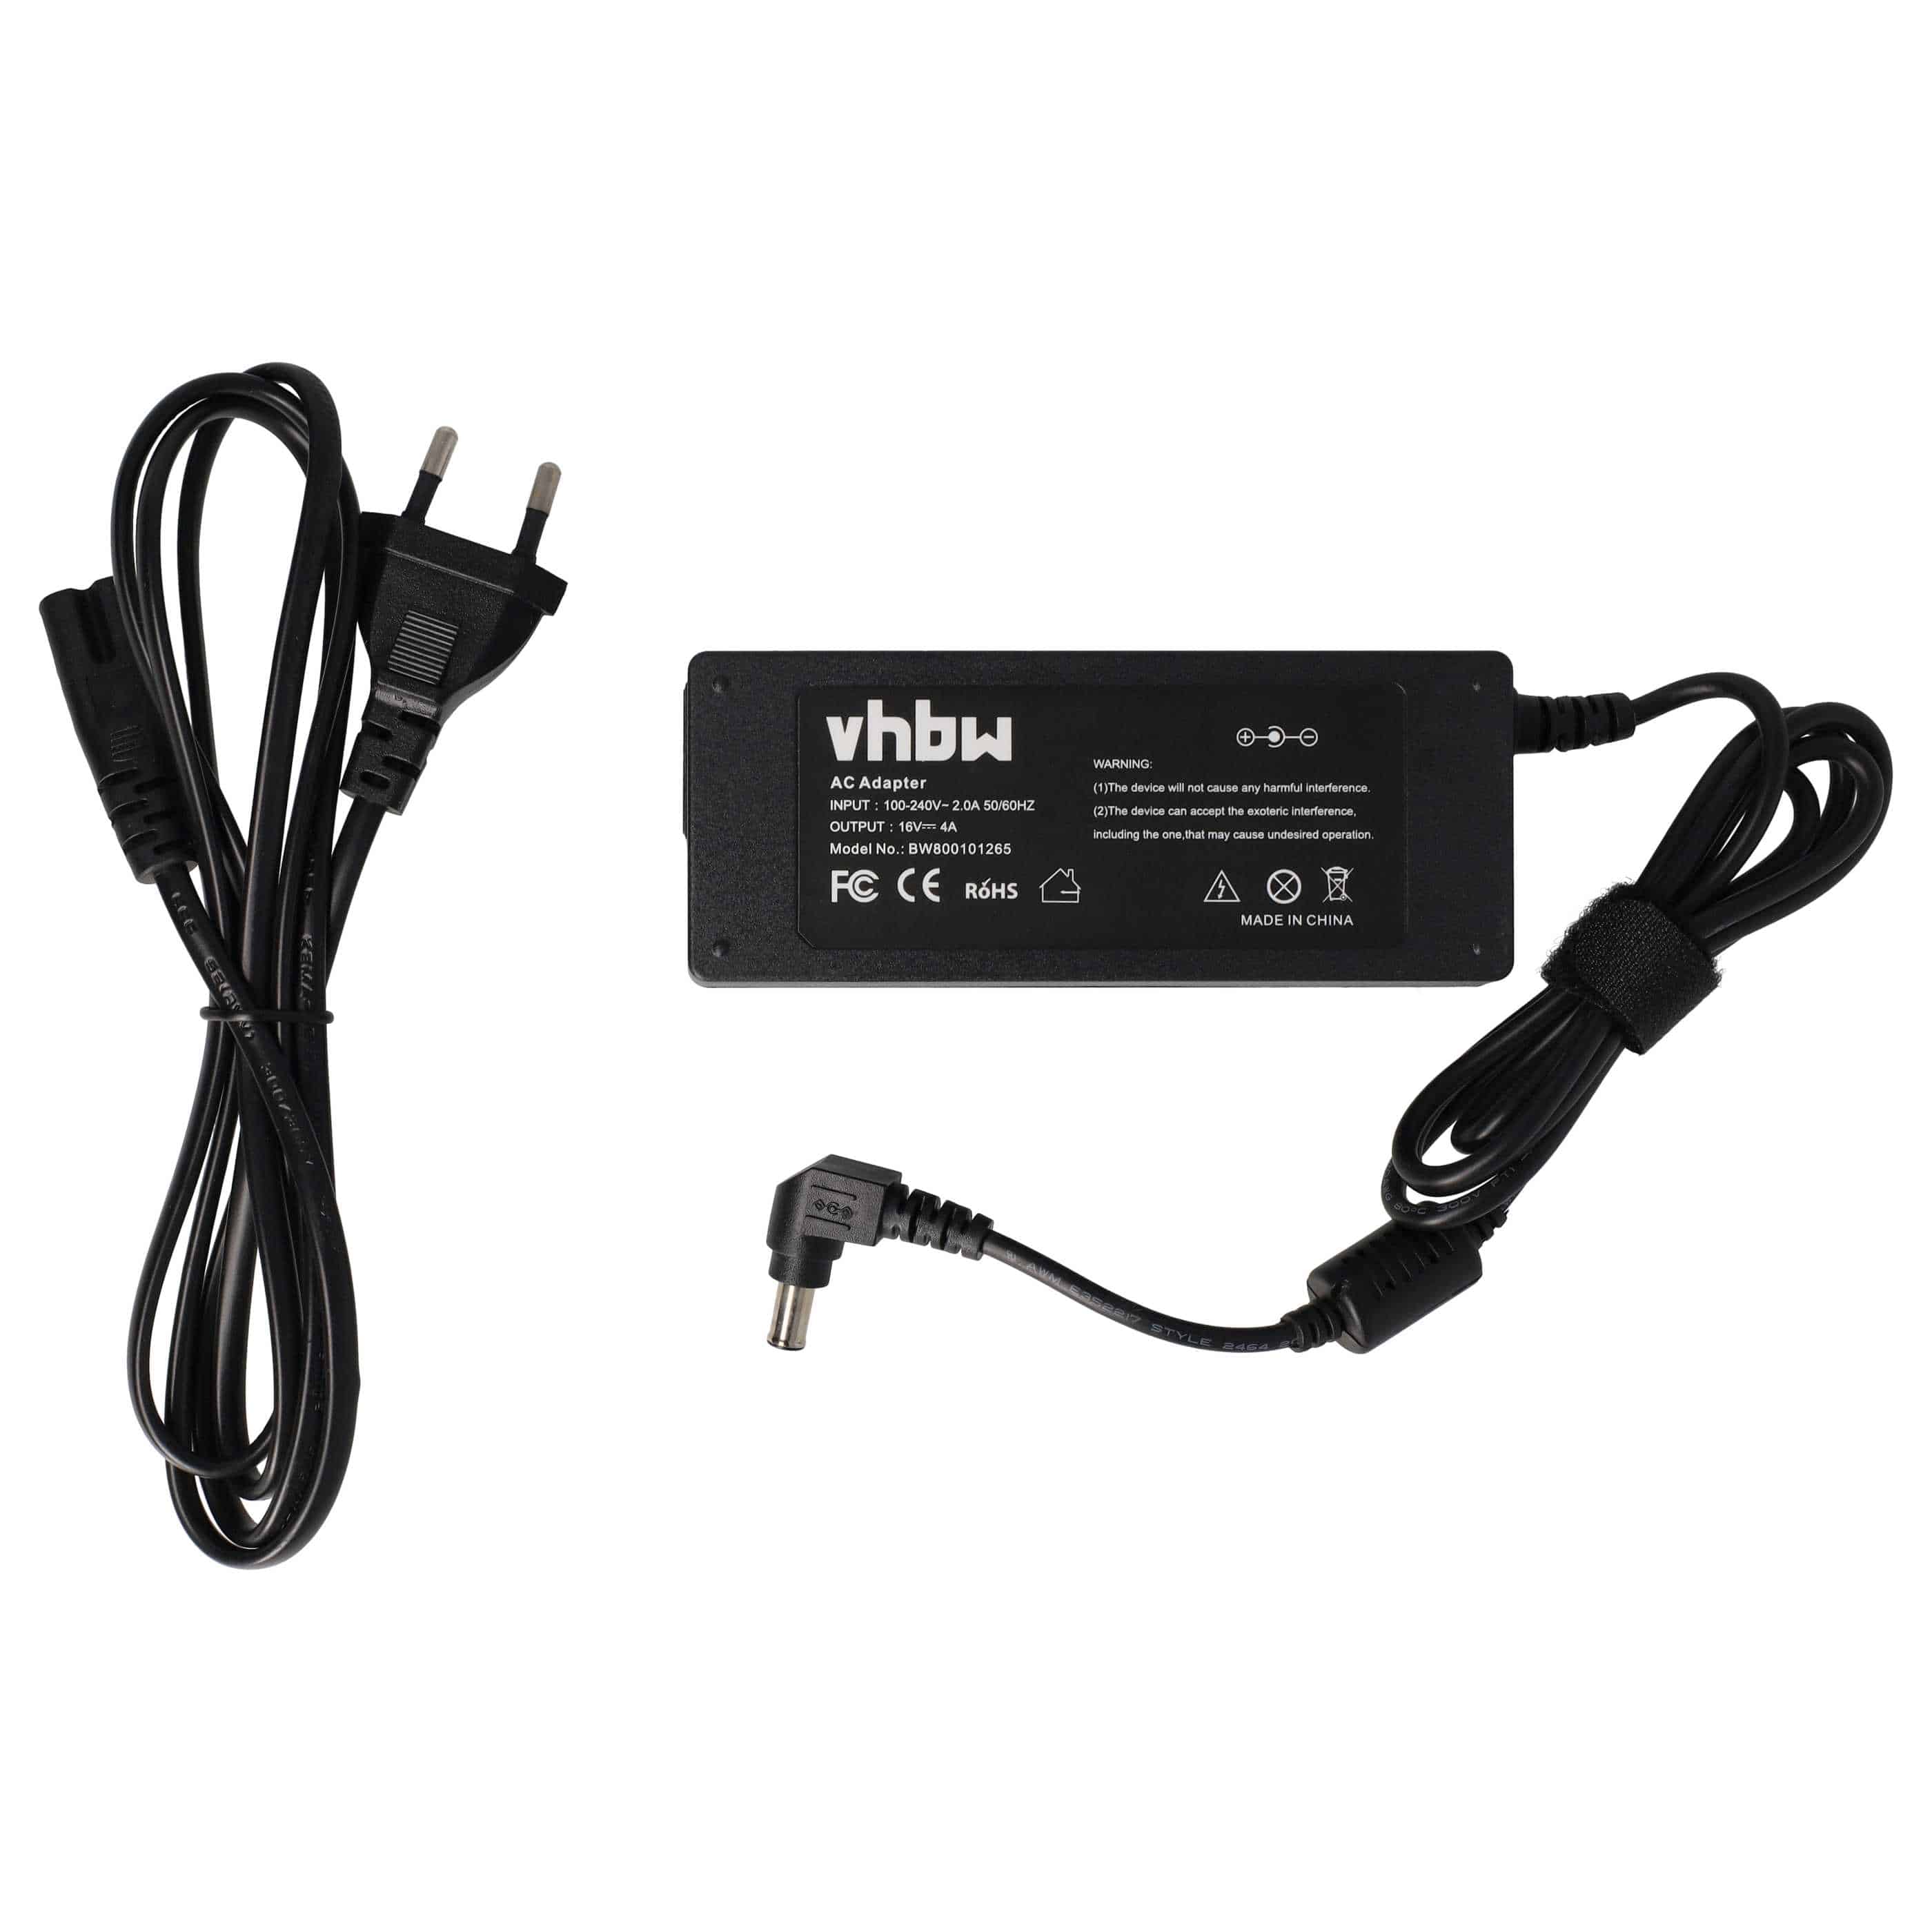 Mains Power Adapter replaces Sony PCGA-AC16V3, PCGA-AC16V4, PCGA-AC16V6, PCGA-AC16V1 for SonyNotebook, 64 W